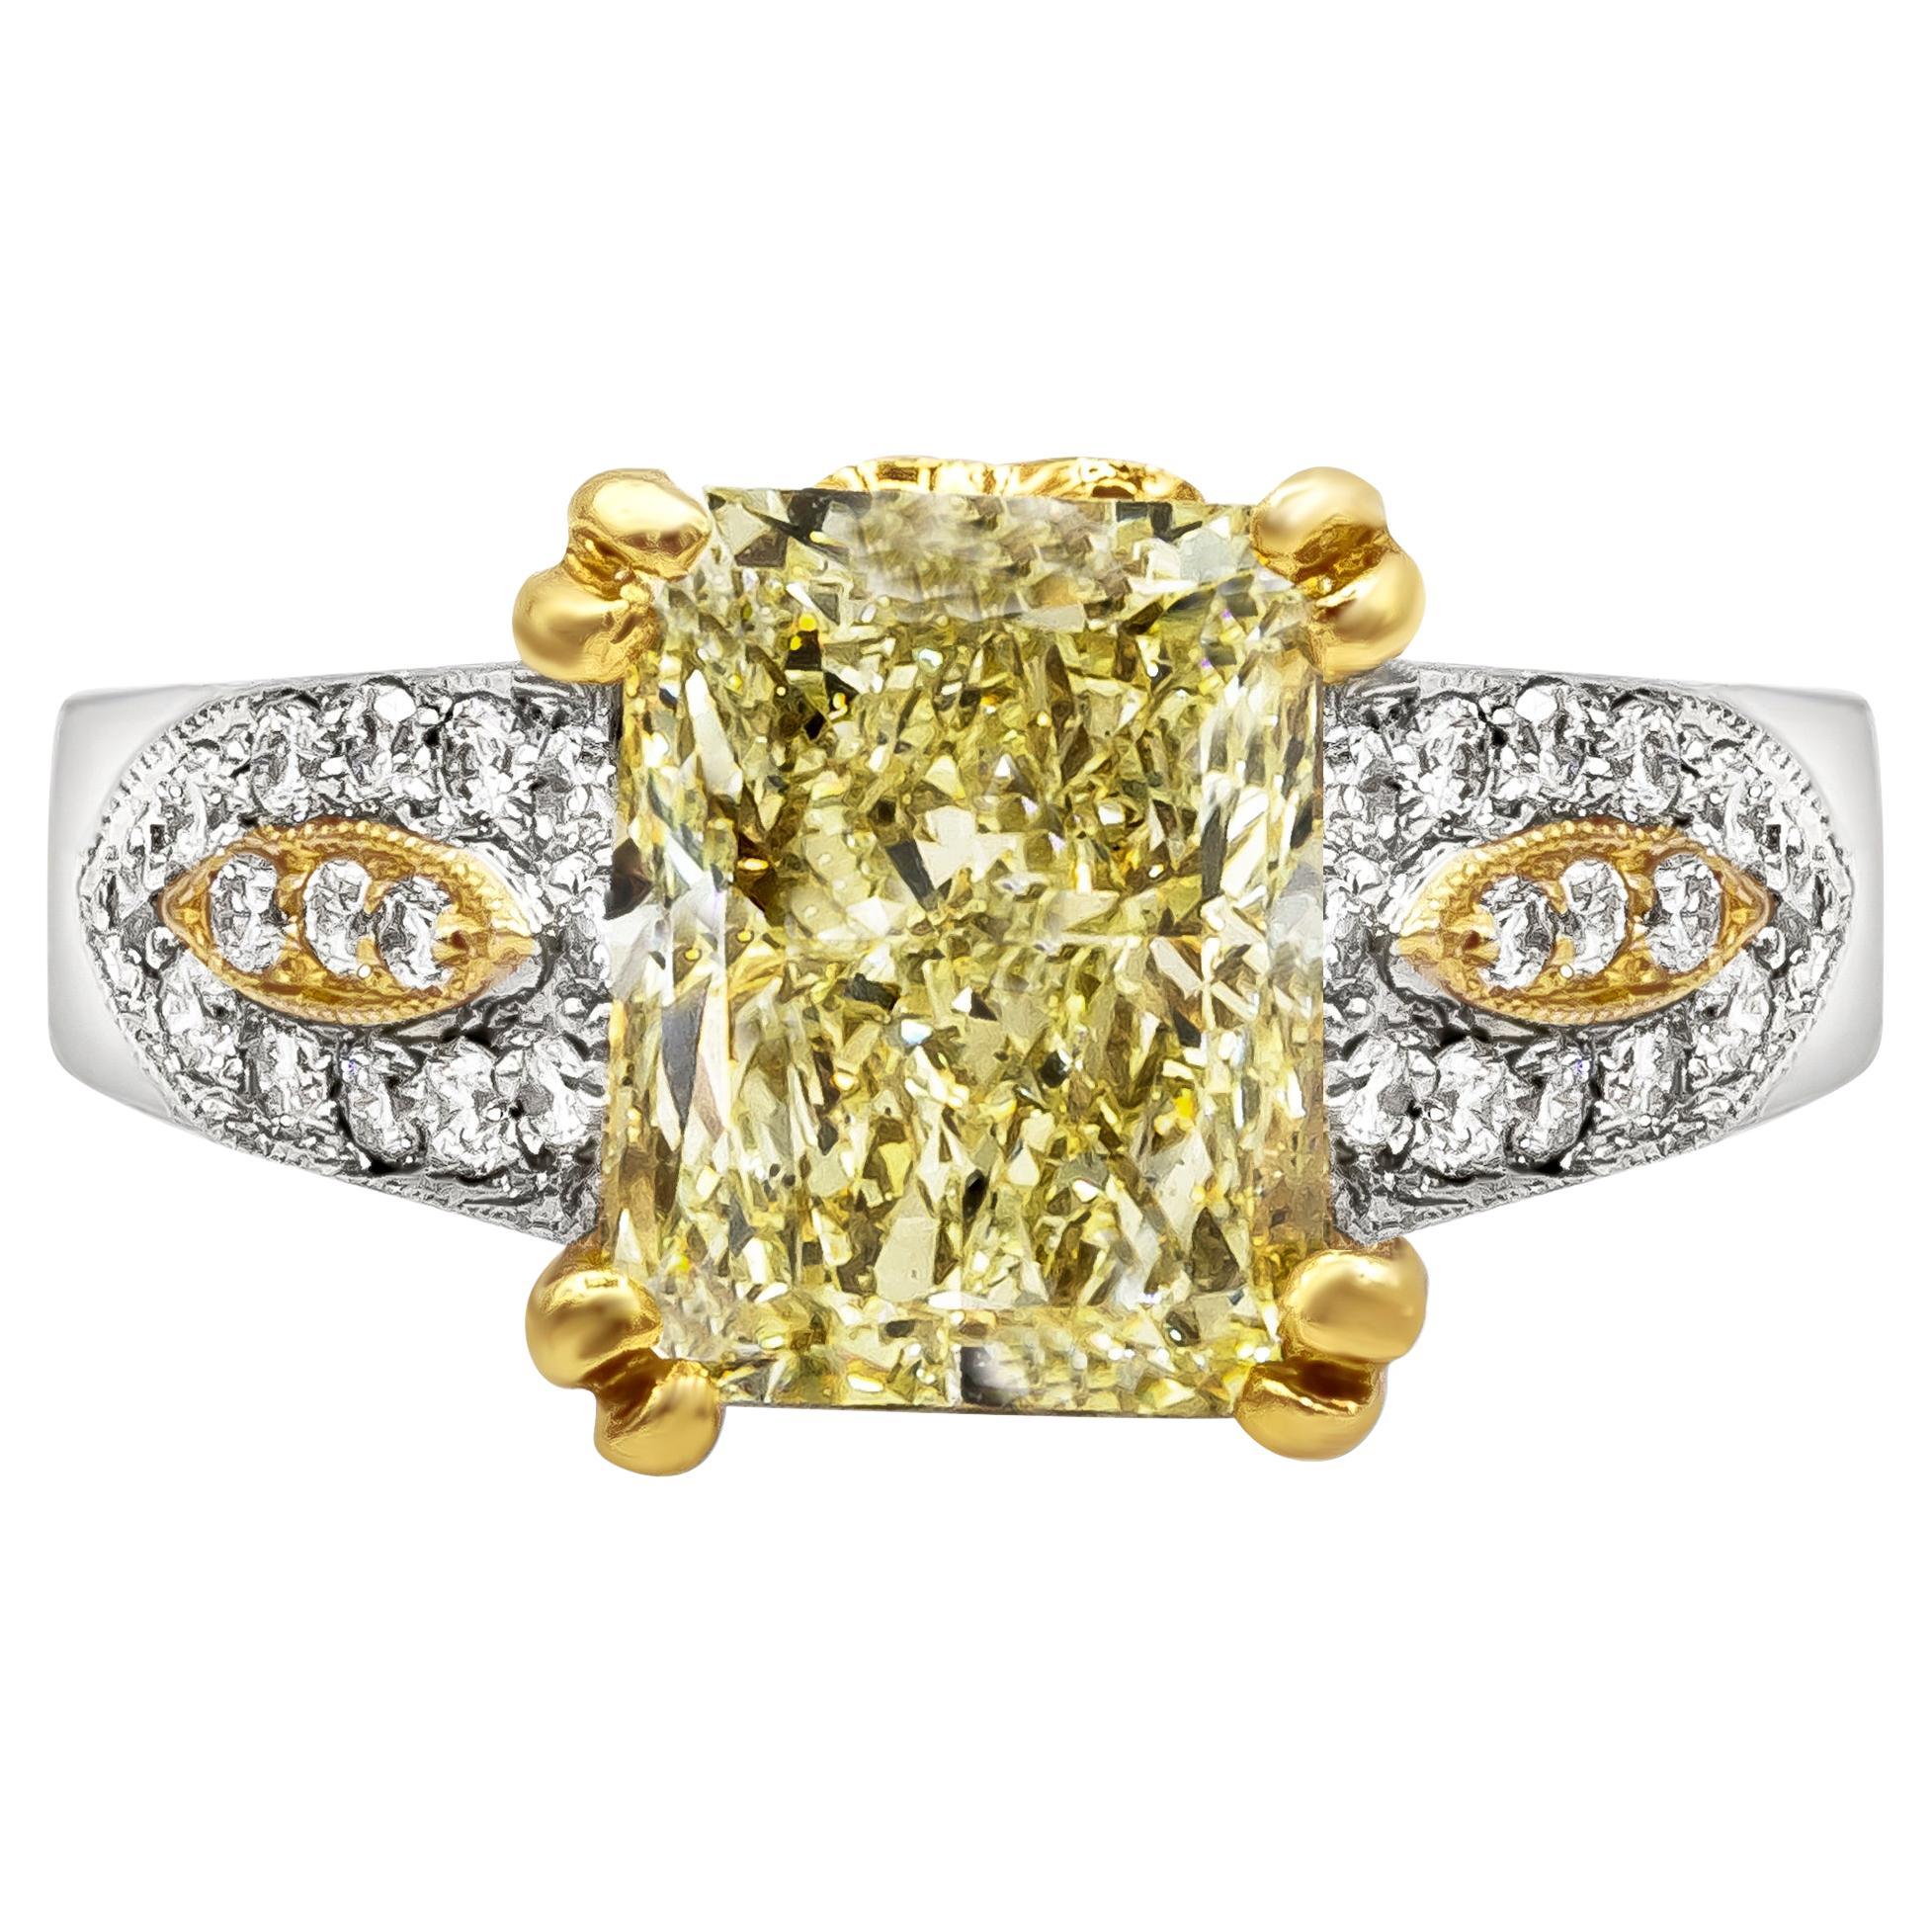 GIA Certified 3.87 Carats Radiant Cut Fancy Yellow Diamond Engagement Ring